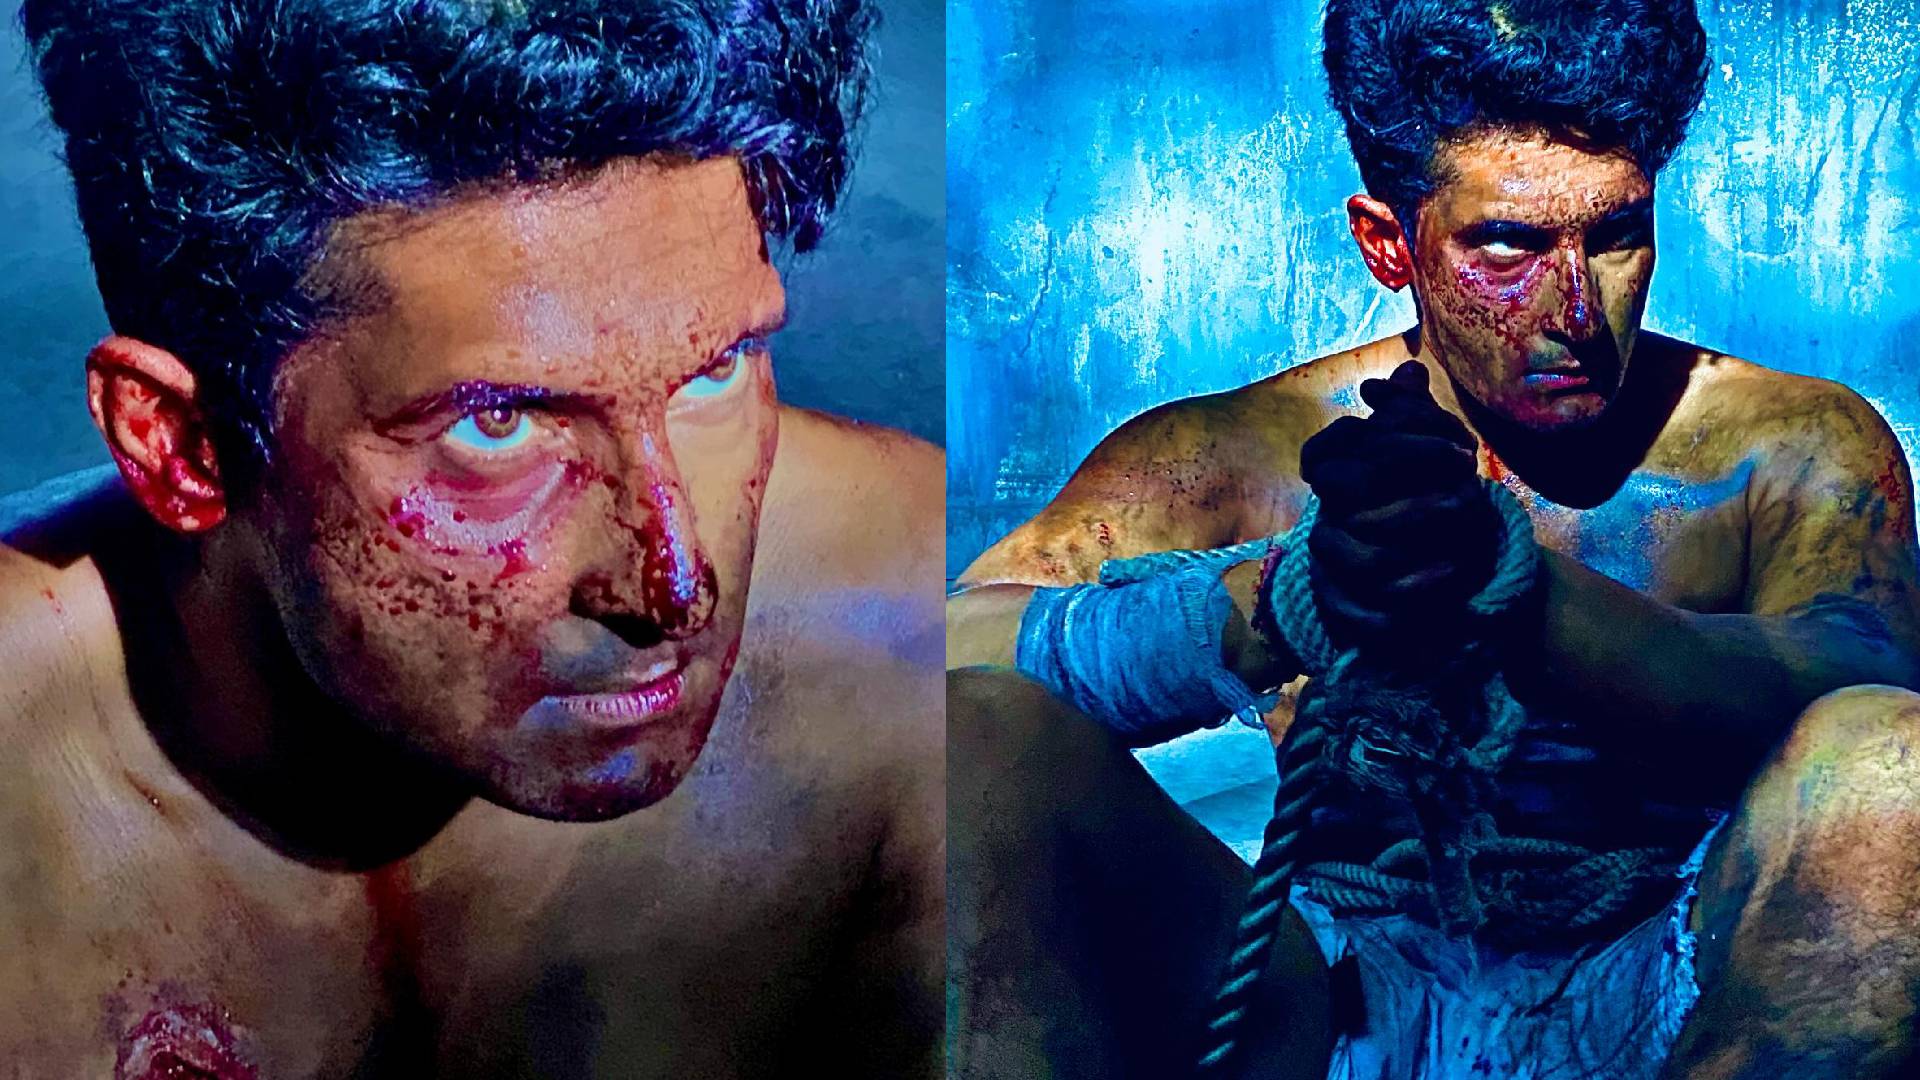 Ravi Dubey shared his intense injured look and we wonder, is this from his latest film shoot?